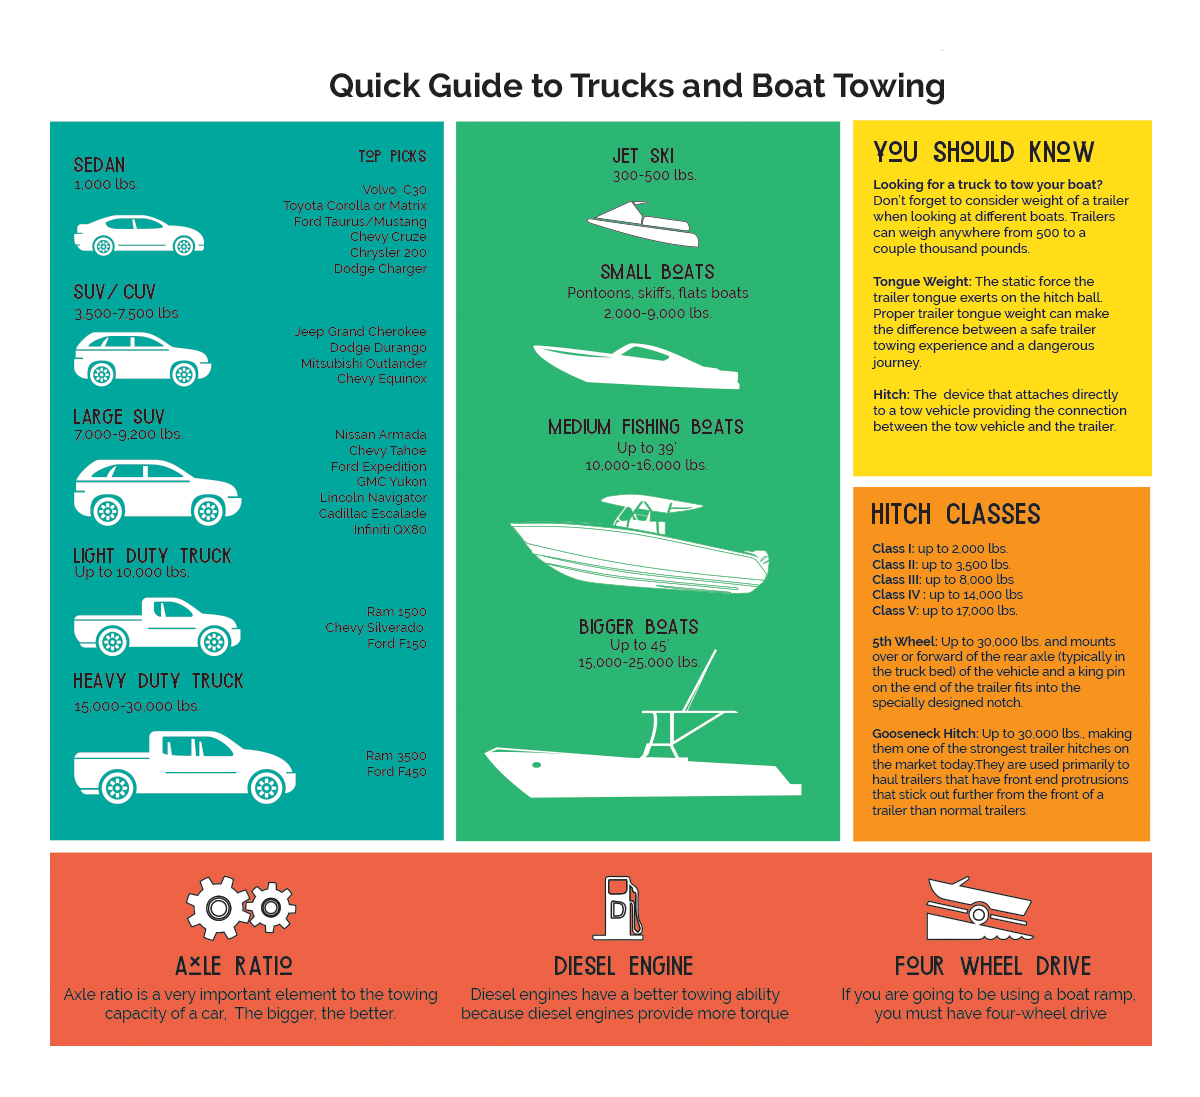 Trucks and Boat Towing Guide